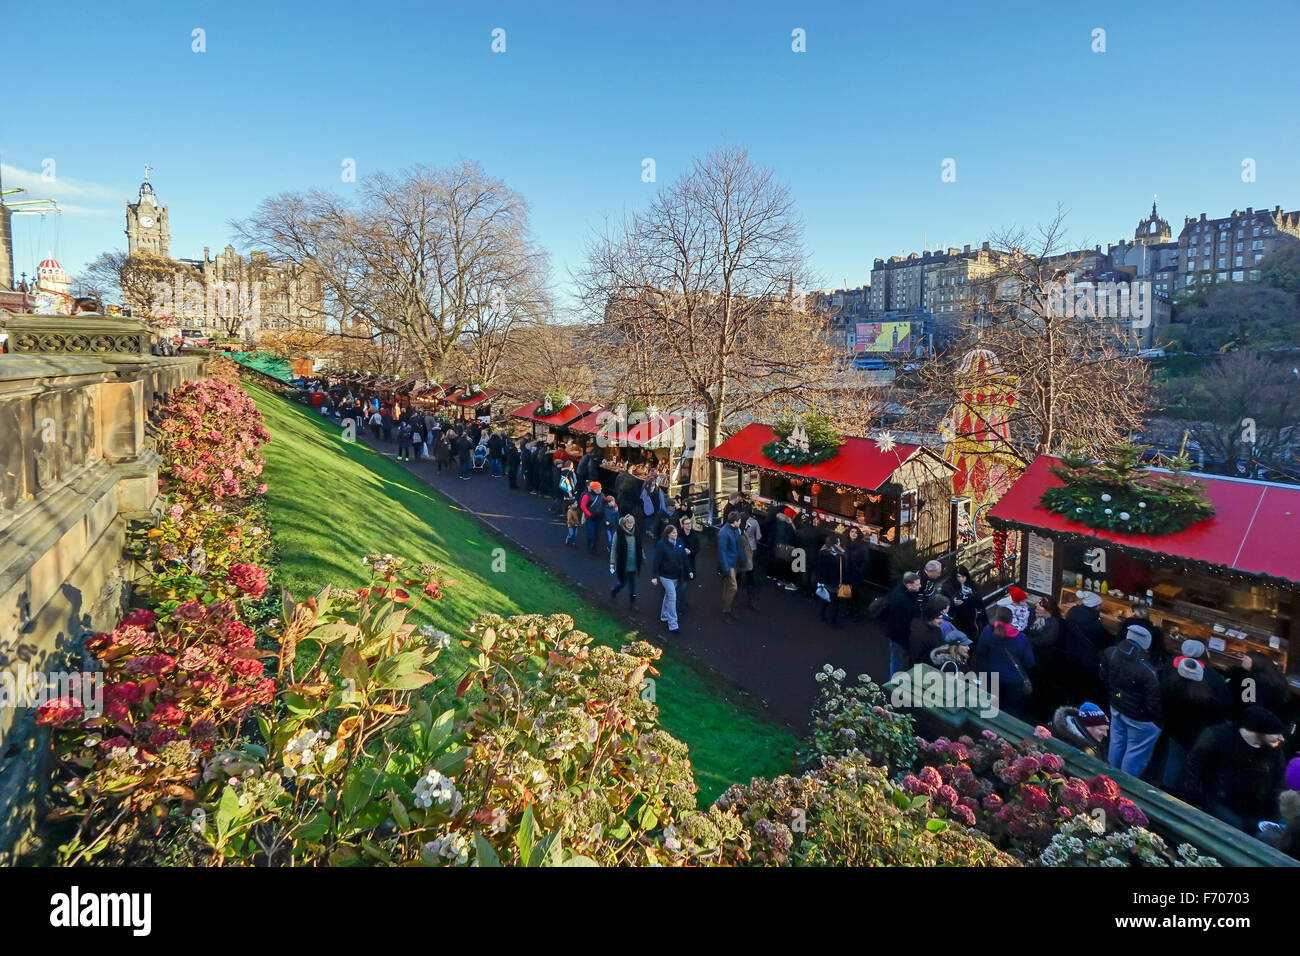 Edinburgh Christmas market 2015 in East Princes Gardens Edinburgh with stalls selling goods and food & drink Stock Photo